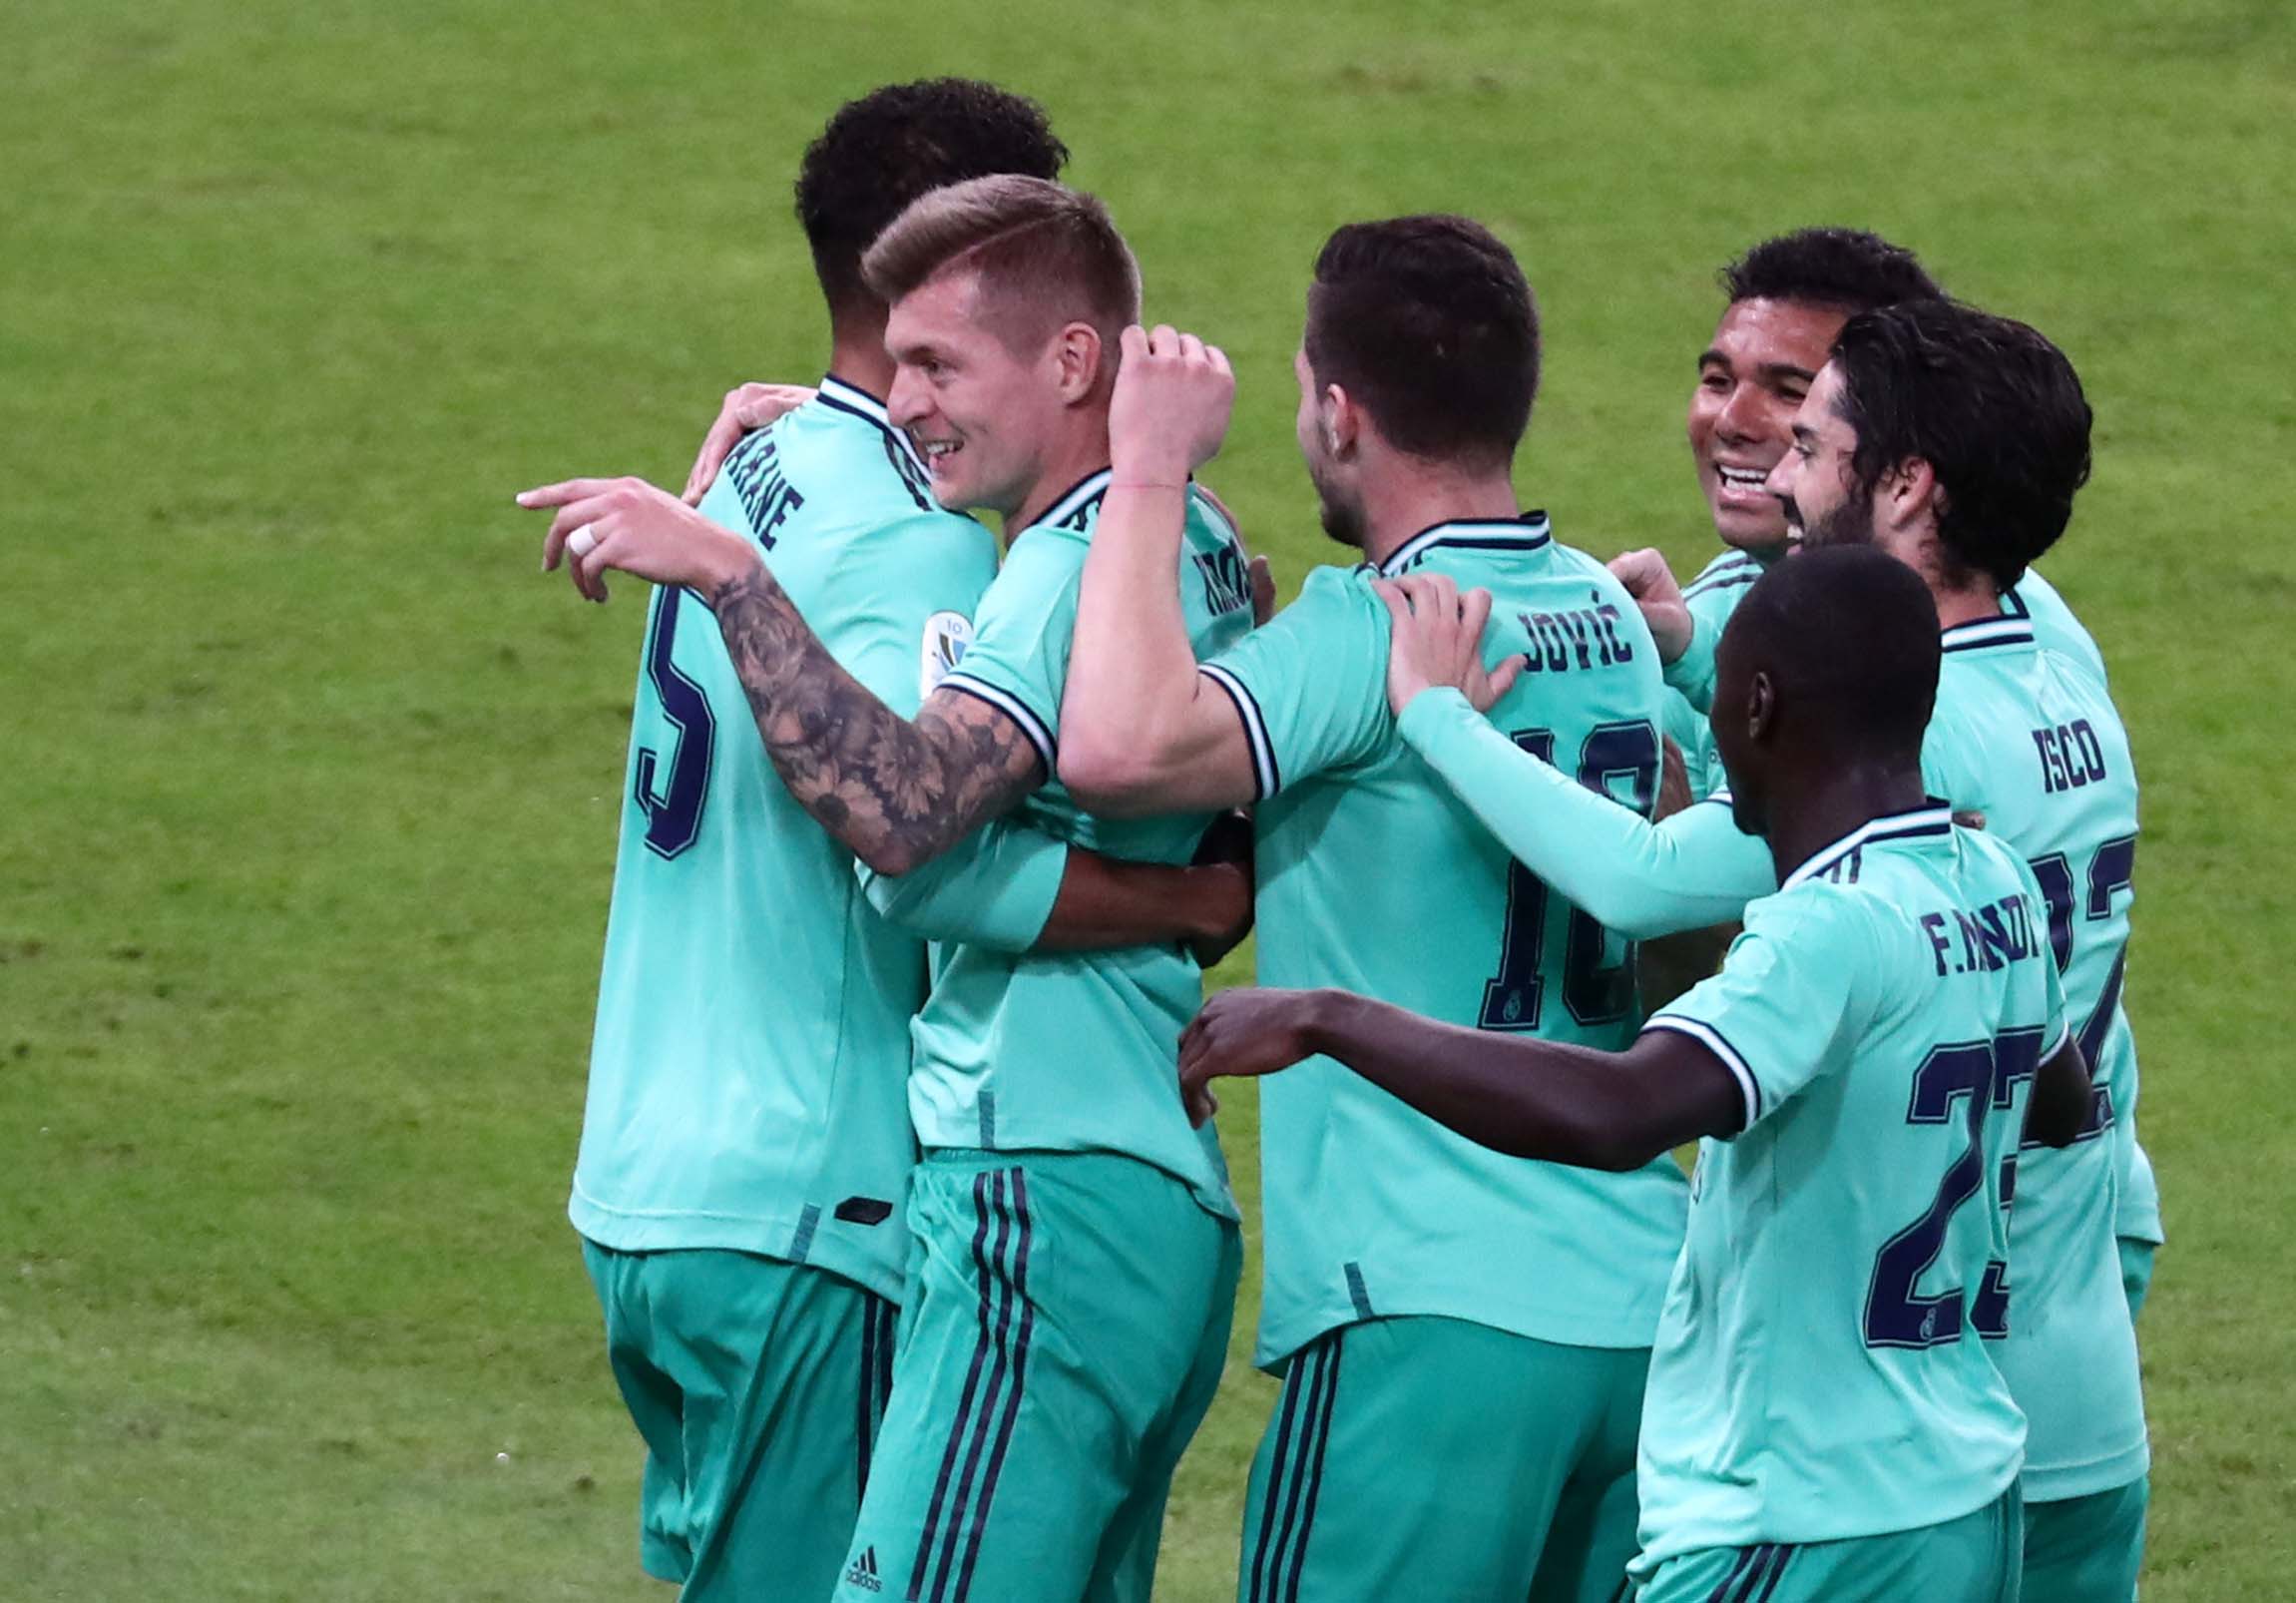 Real Madrid's Toni Kroos celebrates scoring their first goal with teammates during the Spanish Super Cup Semi Final match between Valencia and Real Madrid, at King Abdullah Sports City, in Jeddah, Saudi Arabia, on January 8, 2020. Photo: Reuters